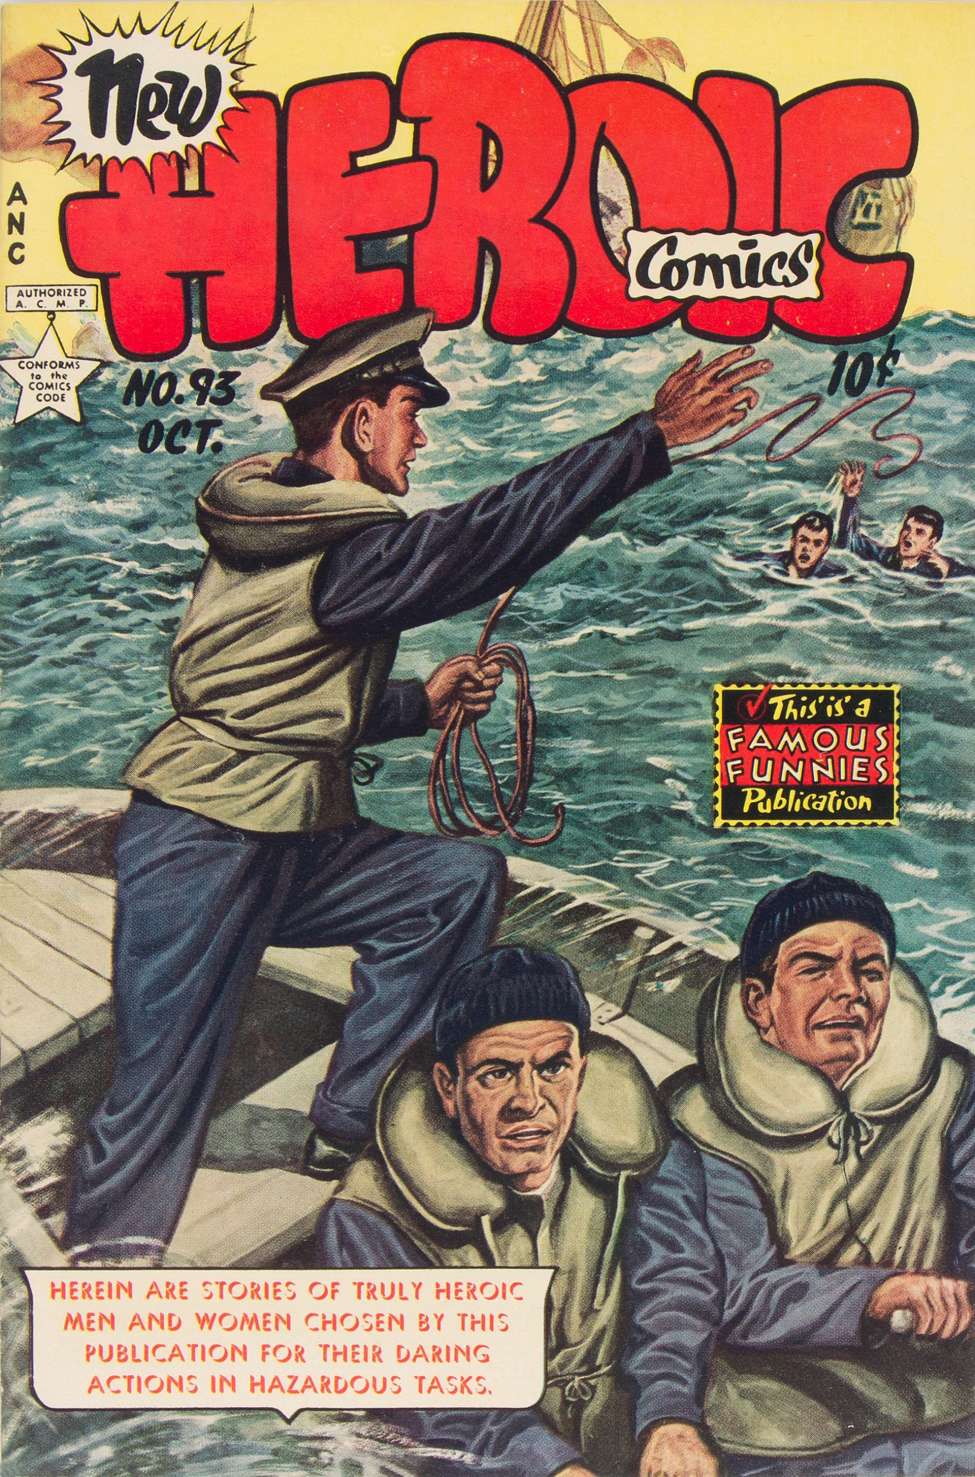 Book Cover For New Heroic Comics 93 - Version 1